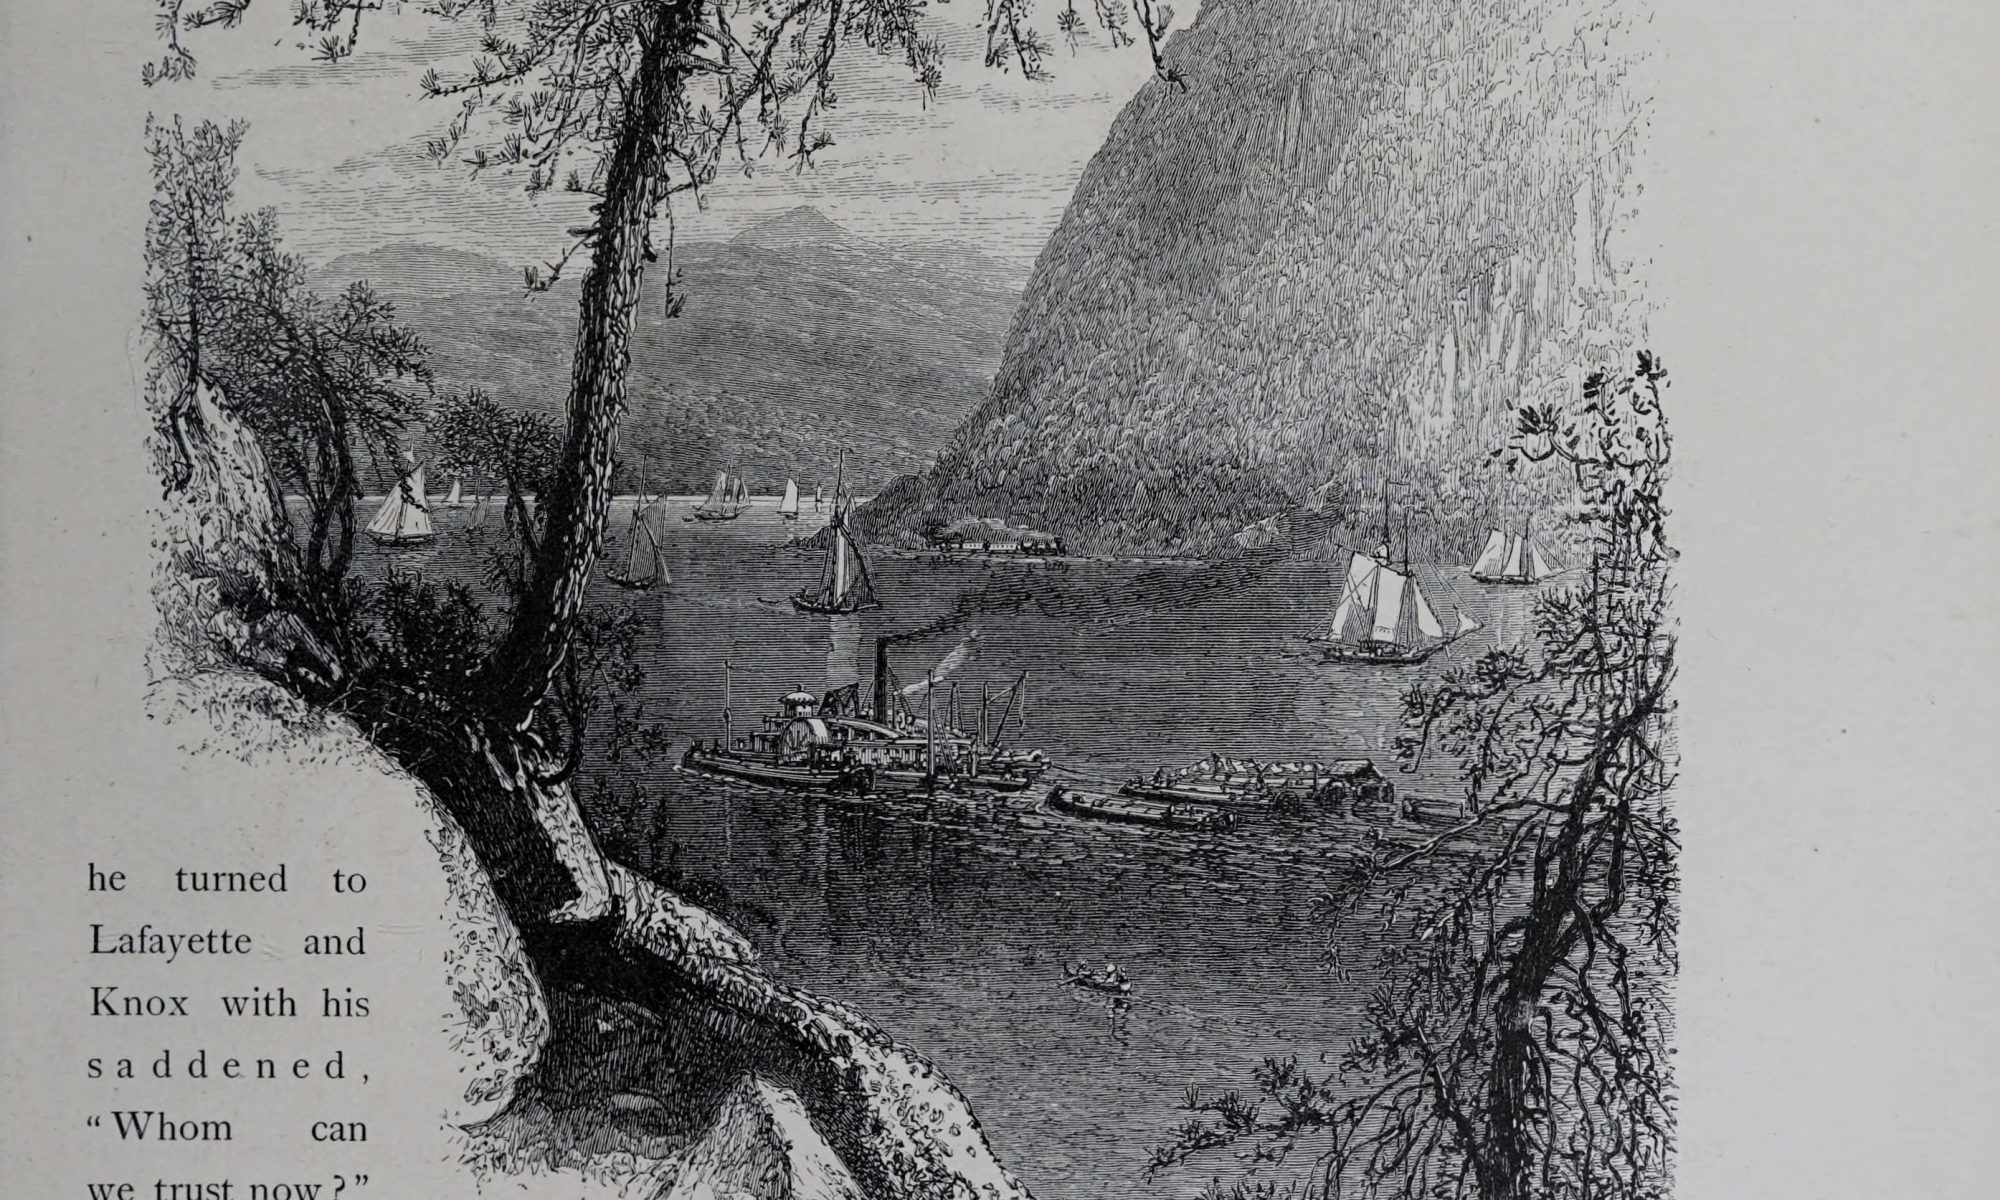 View of the Hudson River from Picturesque America (1874)